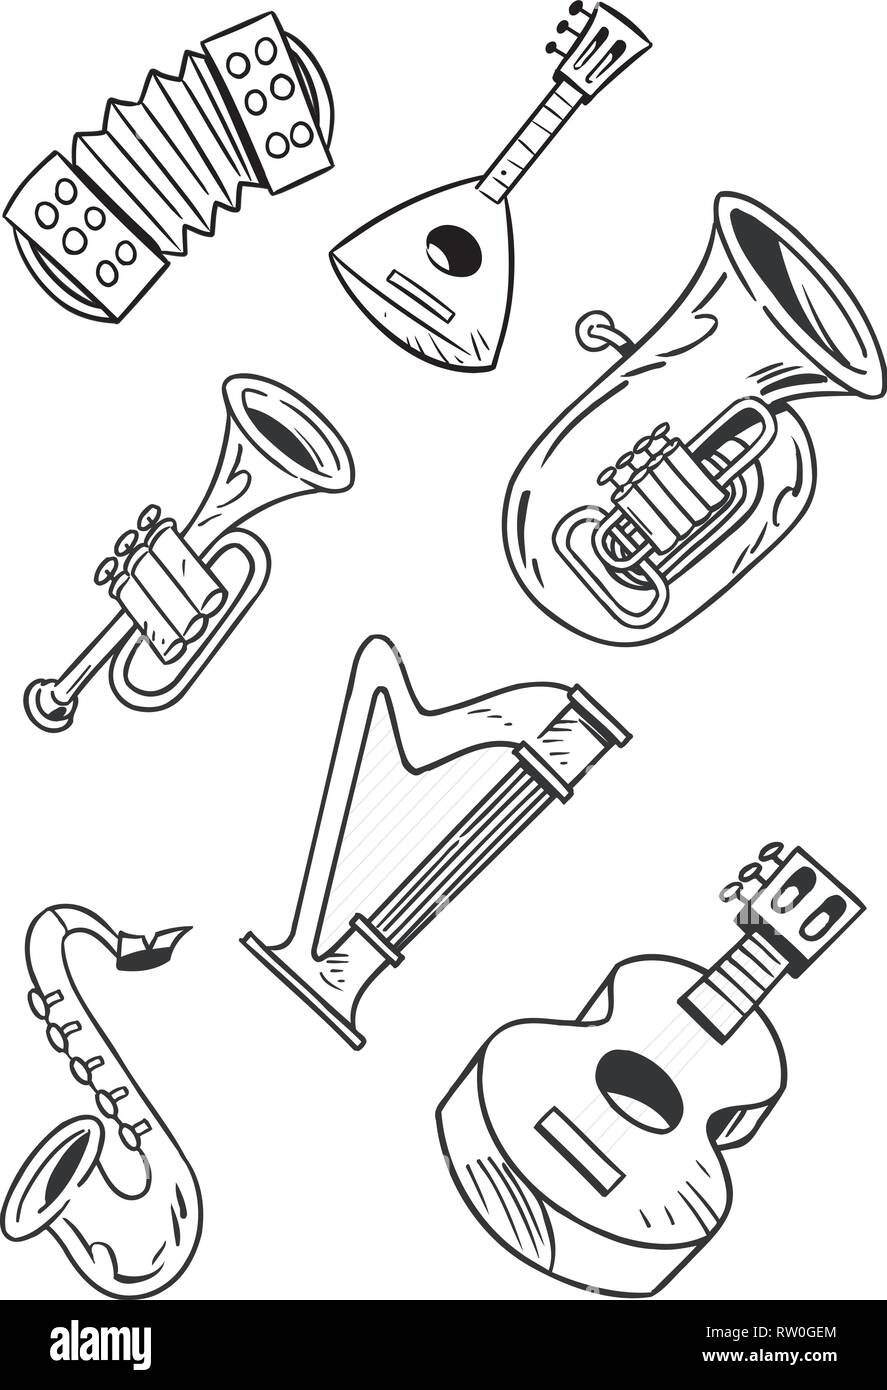 The illustration shows some string and wind musical instruments. Illustration done on separate layers, black contour, isolated on white background Stock Vector